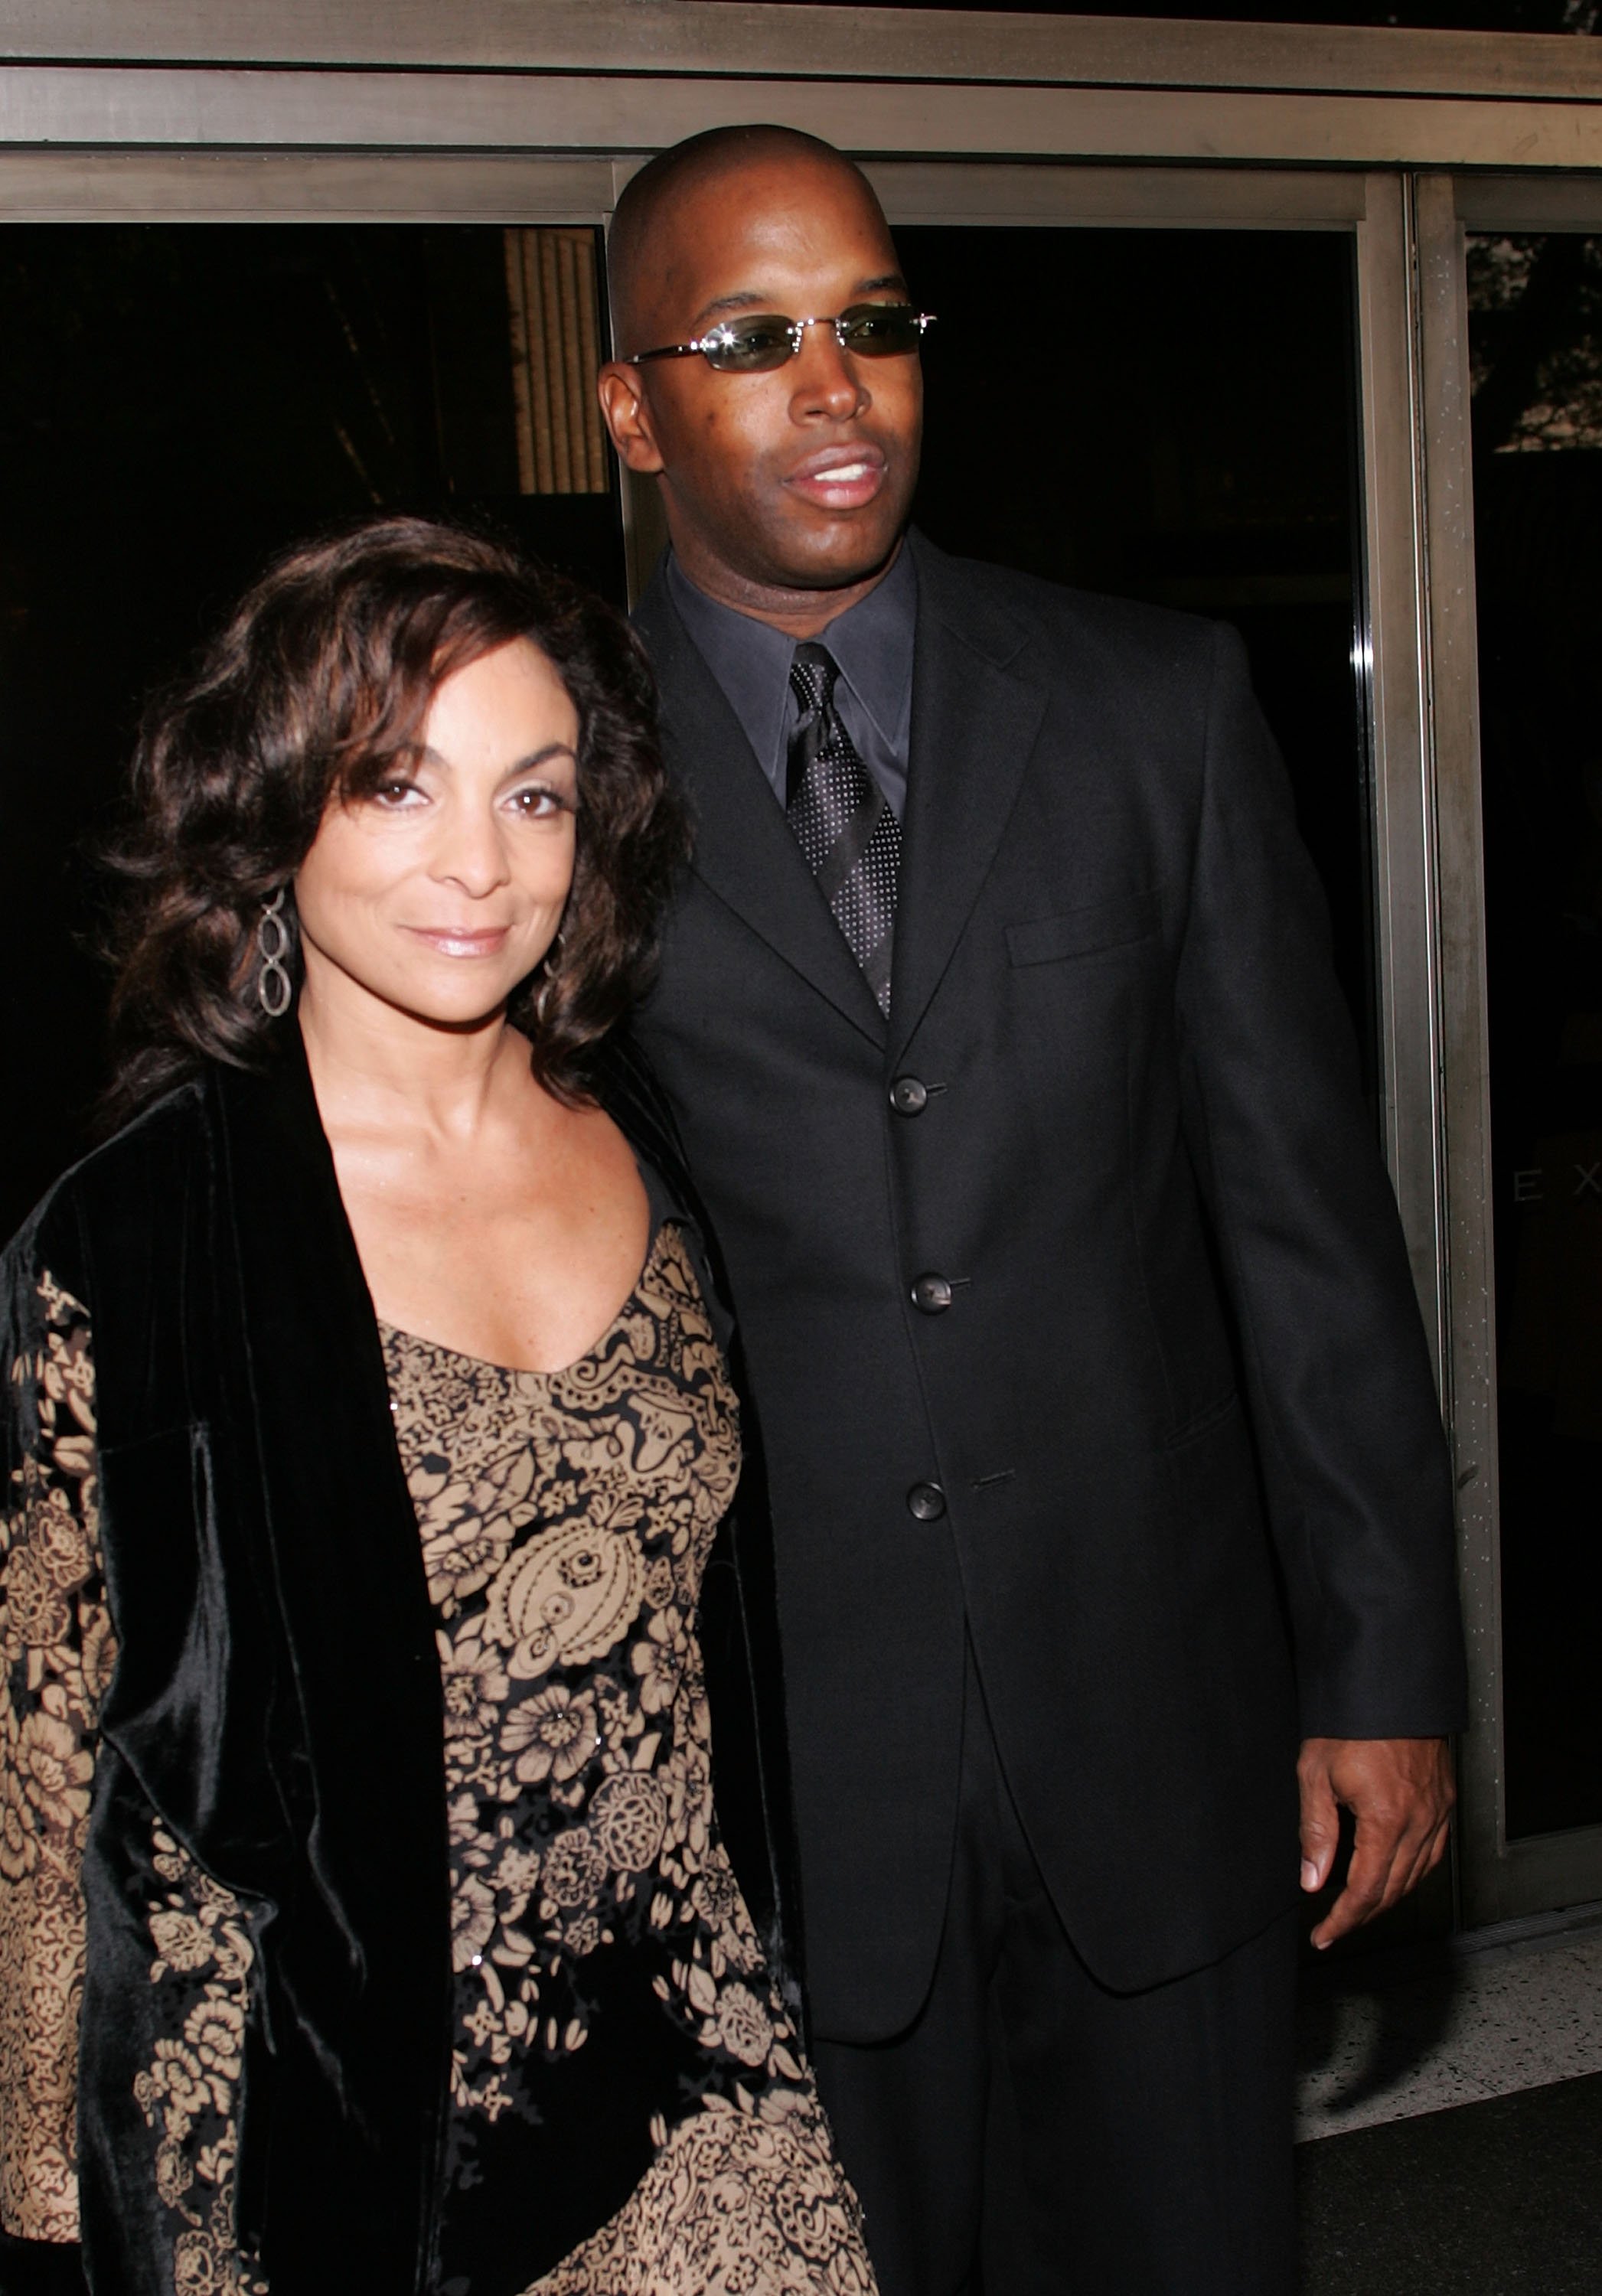 Jasmine Guy & Terrence Duckett at the NAACP Image Awards on March 19, 2005 in California | Photo: Getty Images